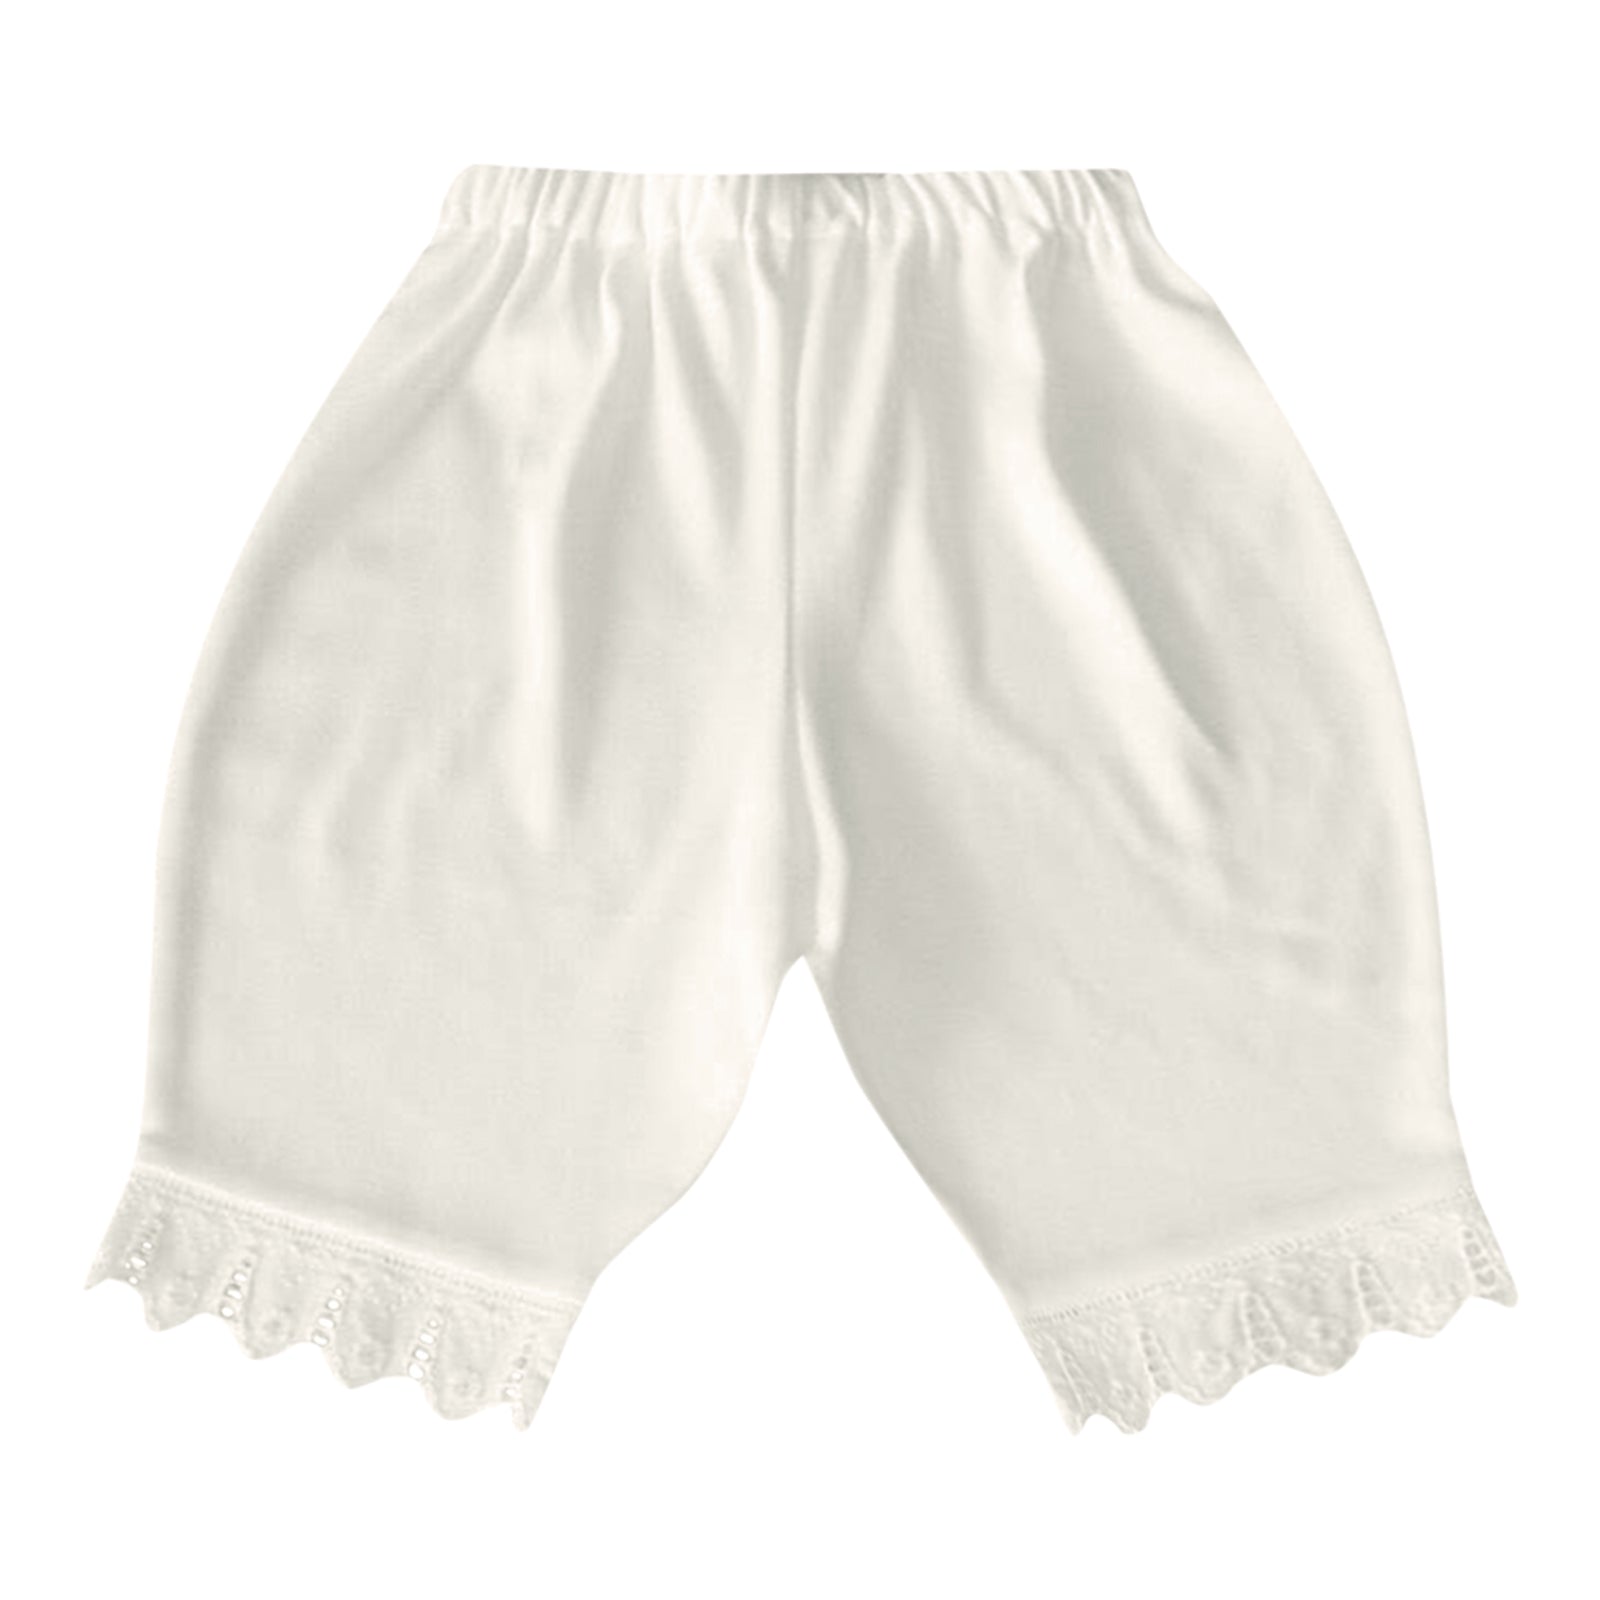 1970s 1980s 6 12 Months Vintage Baby Girls Bloomers Diaper Covers in White  With Lace -  UK